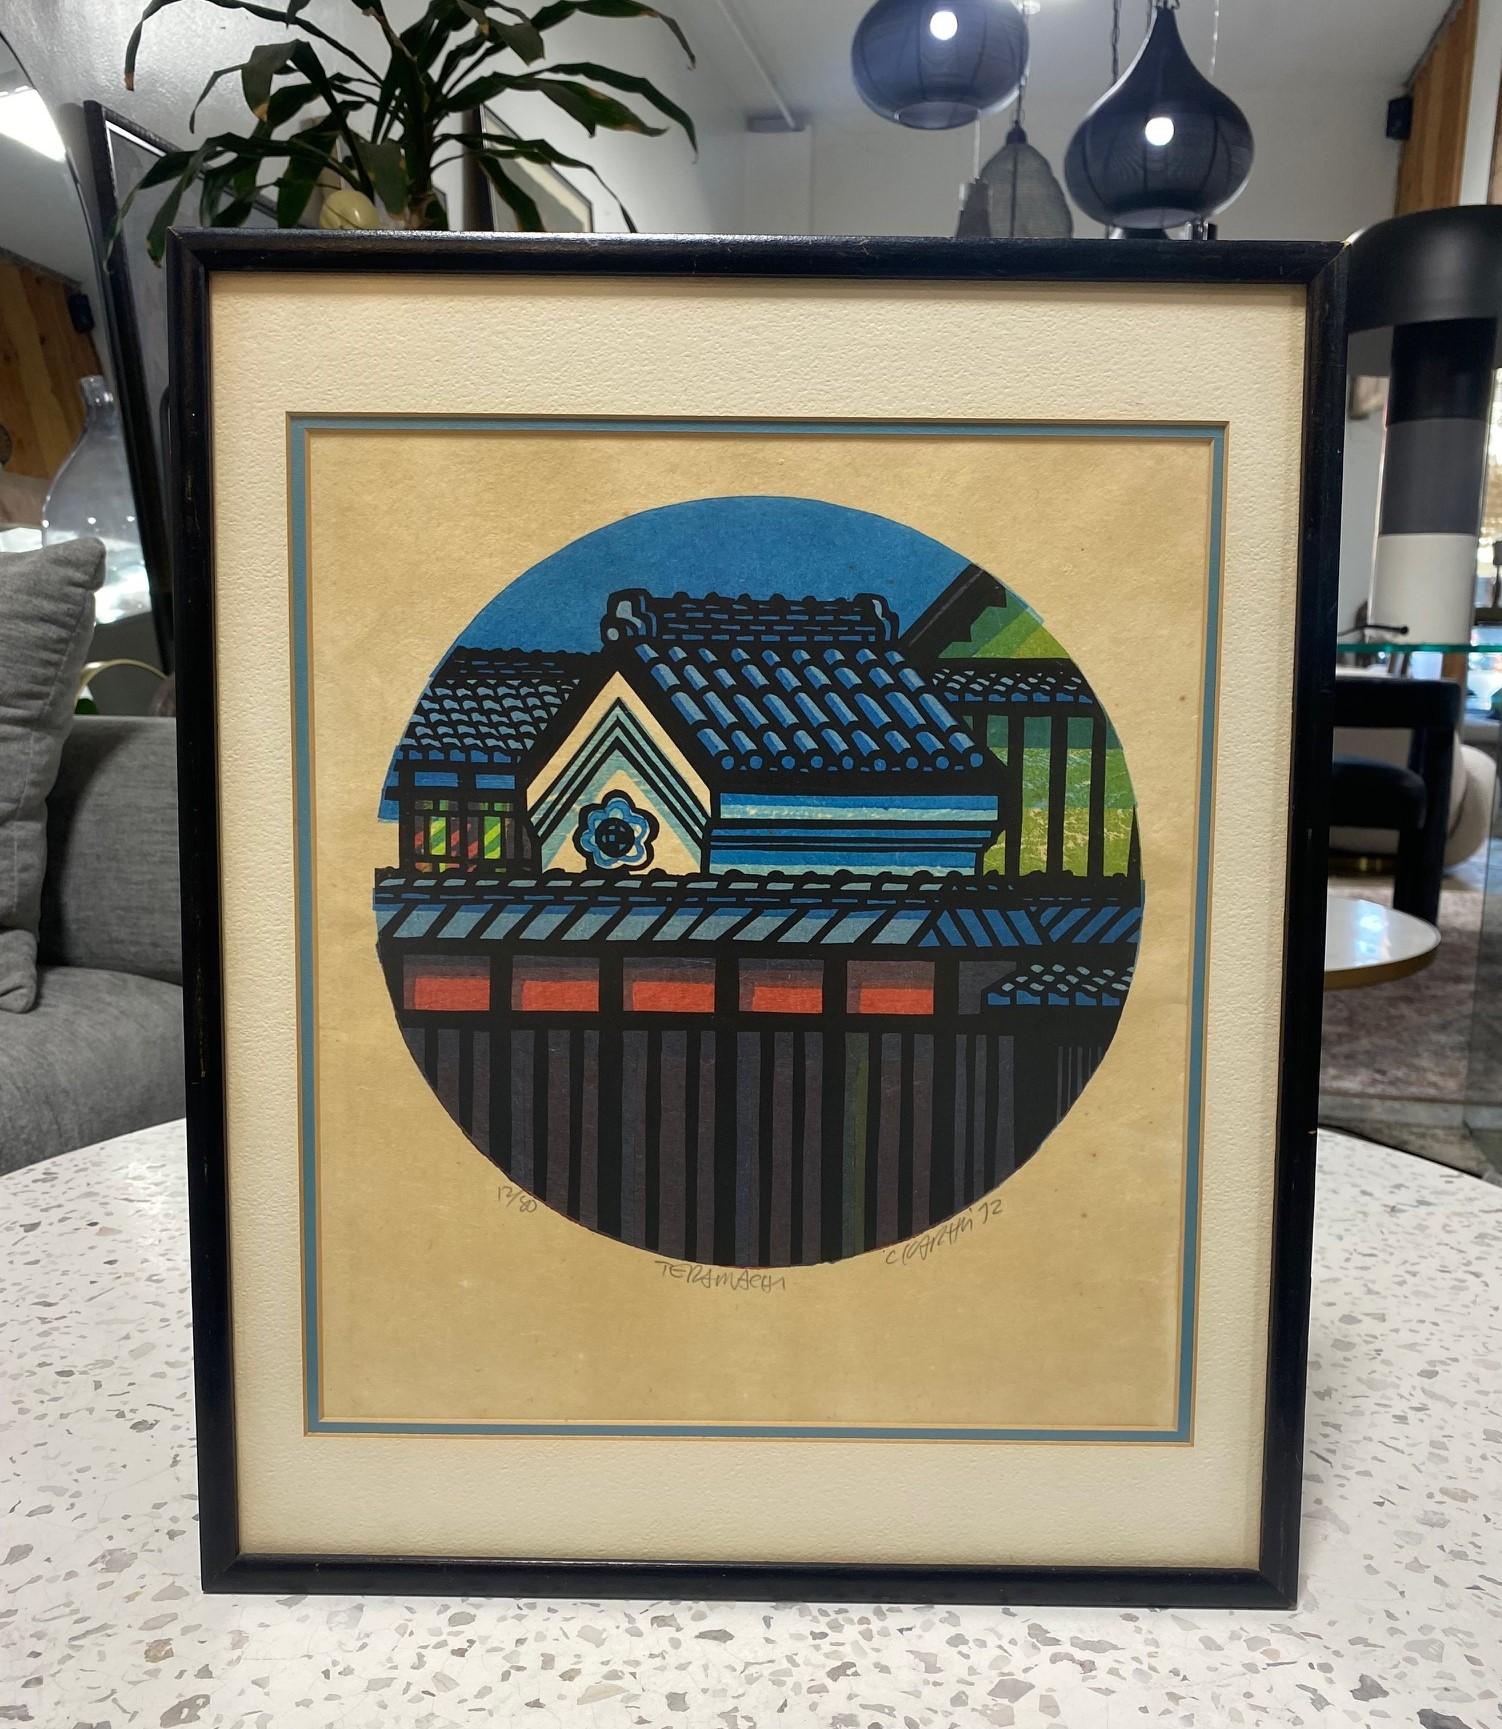 A beautiful, circular-shaped woodblock print by American master printmaker Clifton Karhu who lived in Japan for over 50 years. Karhu's work gained great esteem not only in Japan but worldwide. 

This limited edition print featuring a landmark